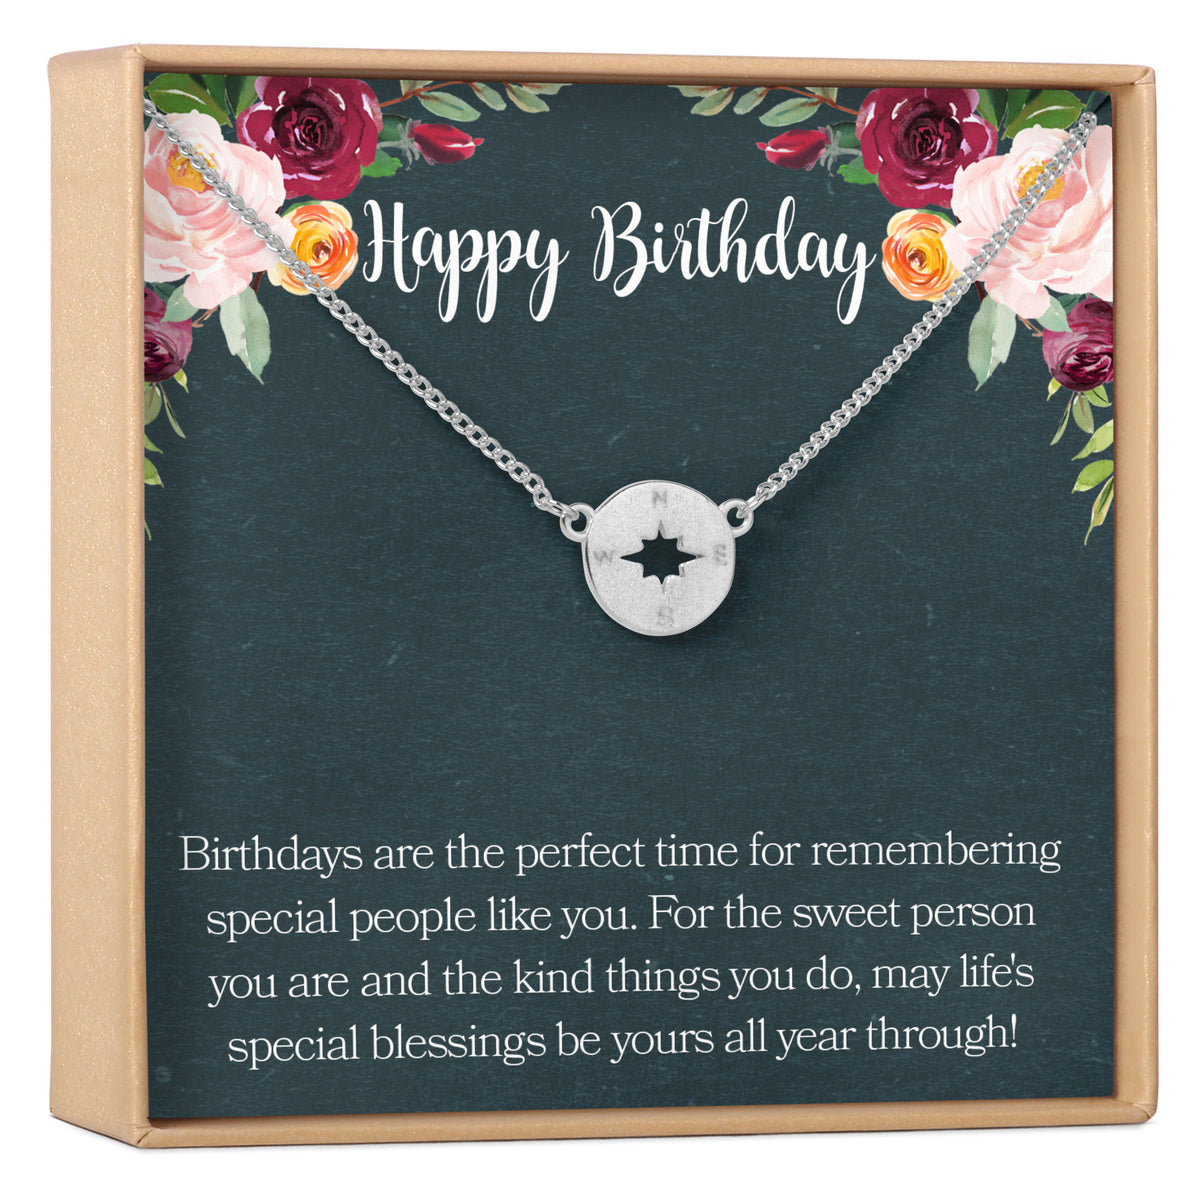 Birthday Gifts for 12 Year Old Girls, Eternal Hope Necklace Gifts for  Teenage Girls, Happy Birthday Jewelry Gifts for My Beautiful Daughter with